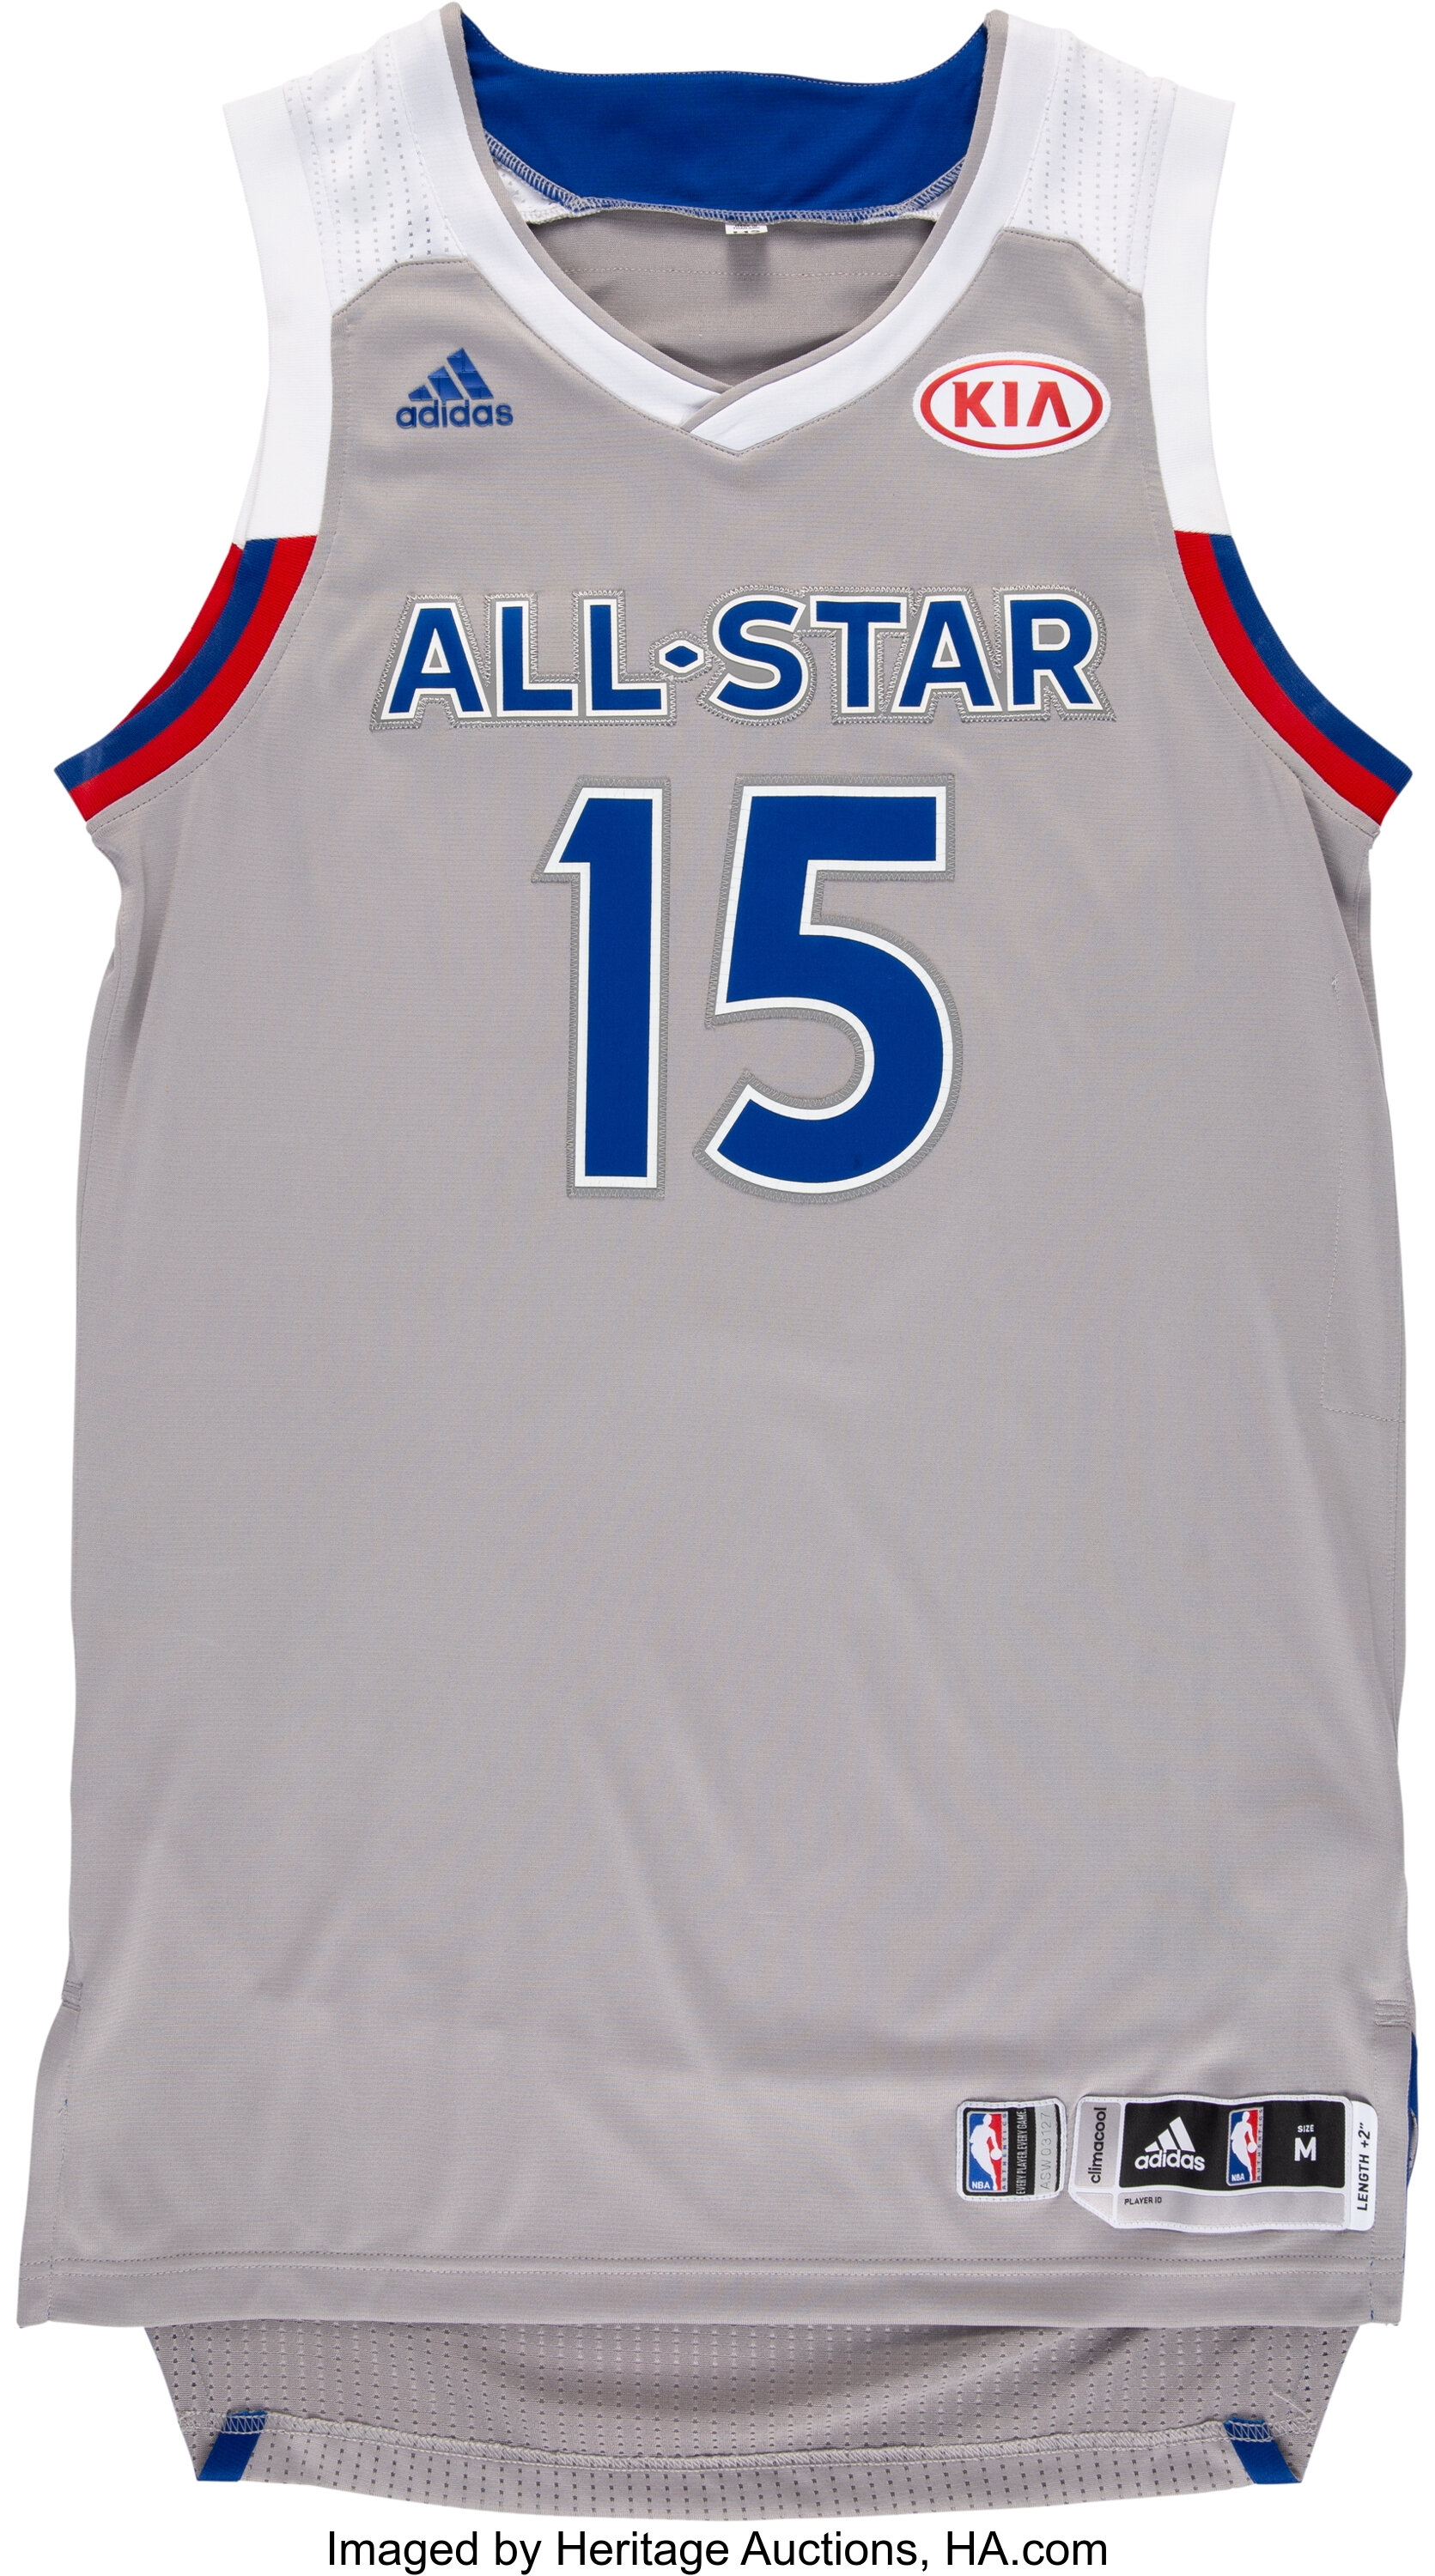 NBA Jersey Database, NBA All Star Game 2017 Played on February 19